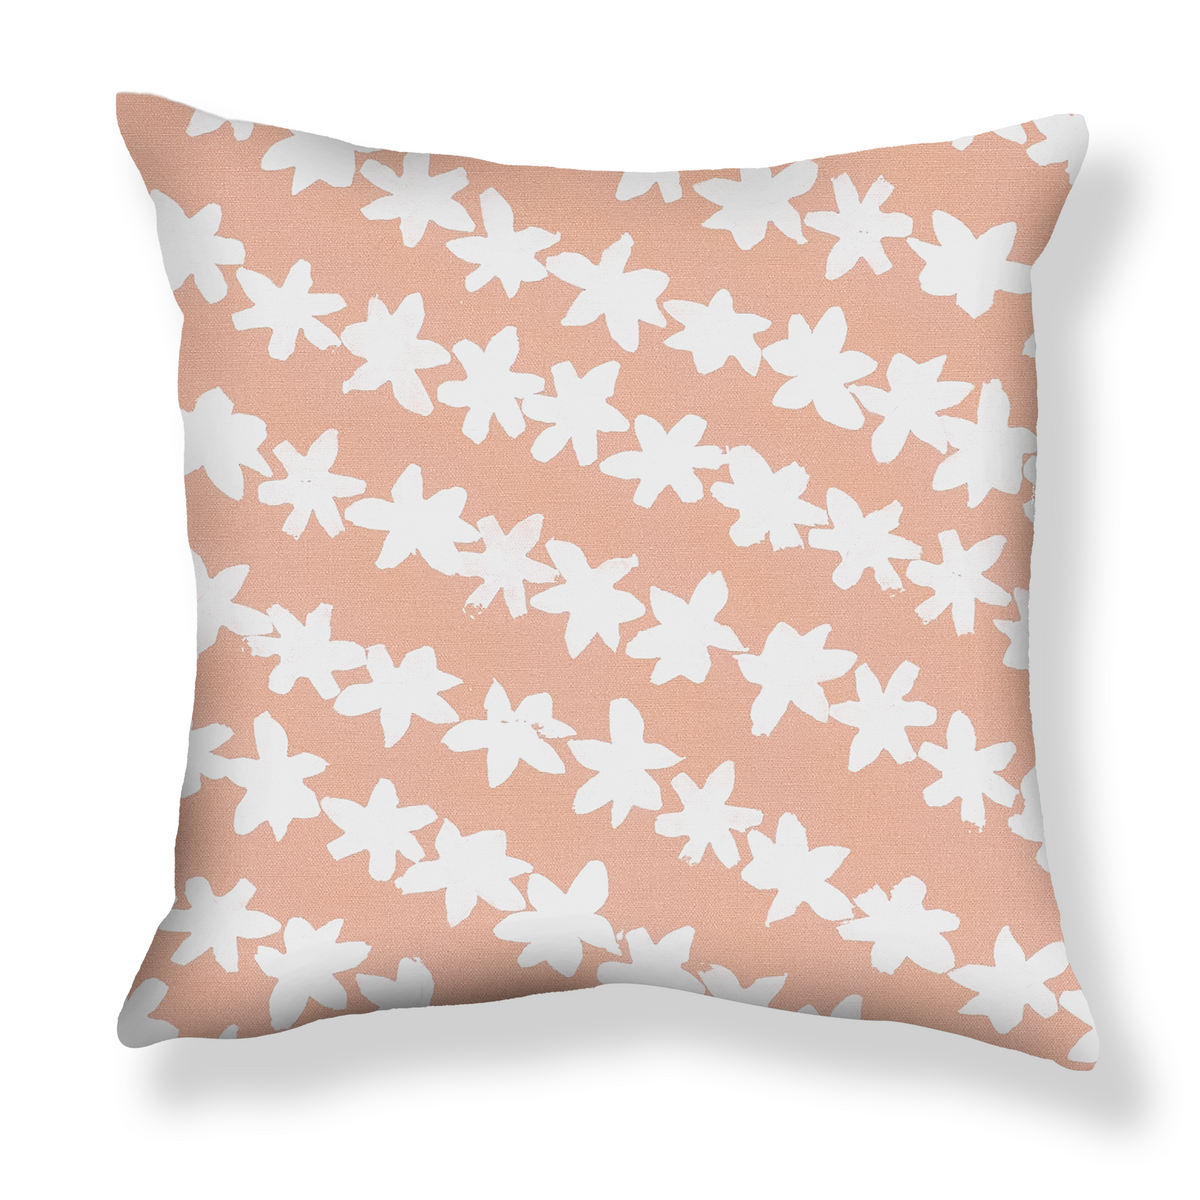 Stamped Garland Pillow in Rose